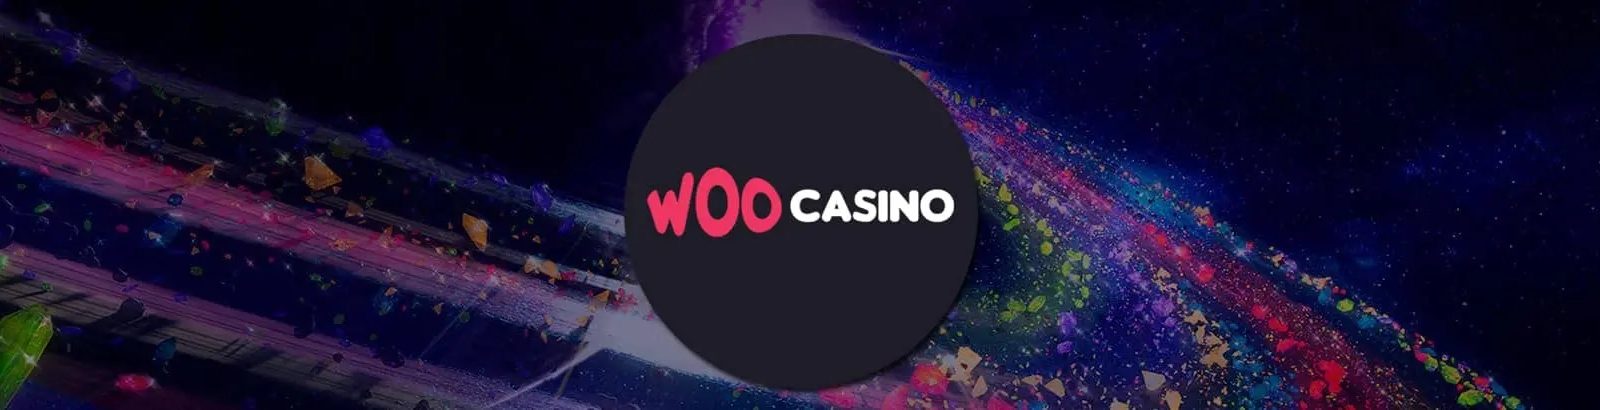 Getting Started on Woo Casino: Your One-Stop-Shop for the Ultimate Guide